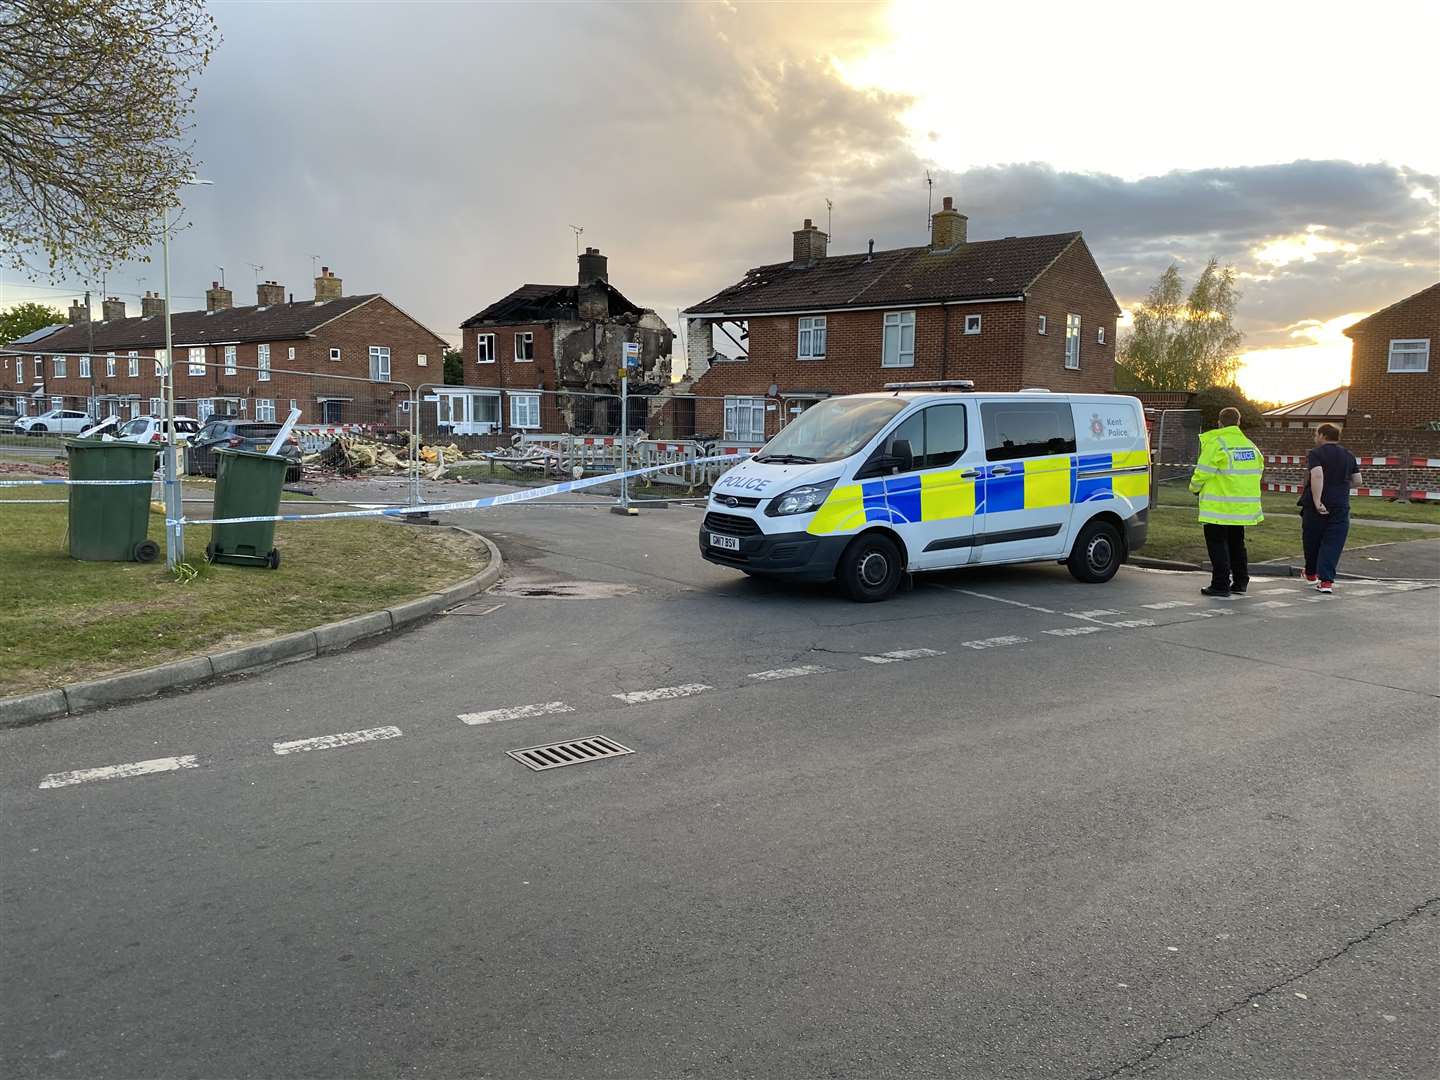 Police are still at the scene of the explosion in Mill View this evening